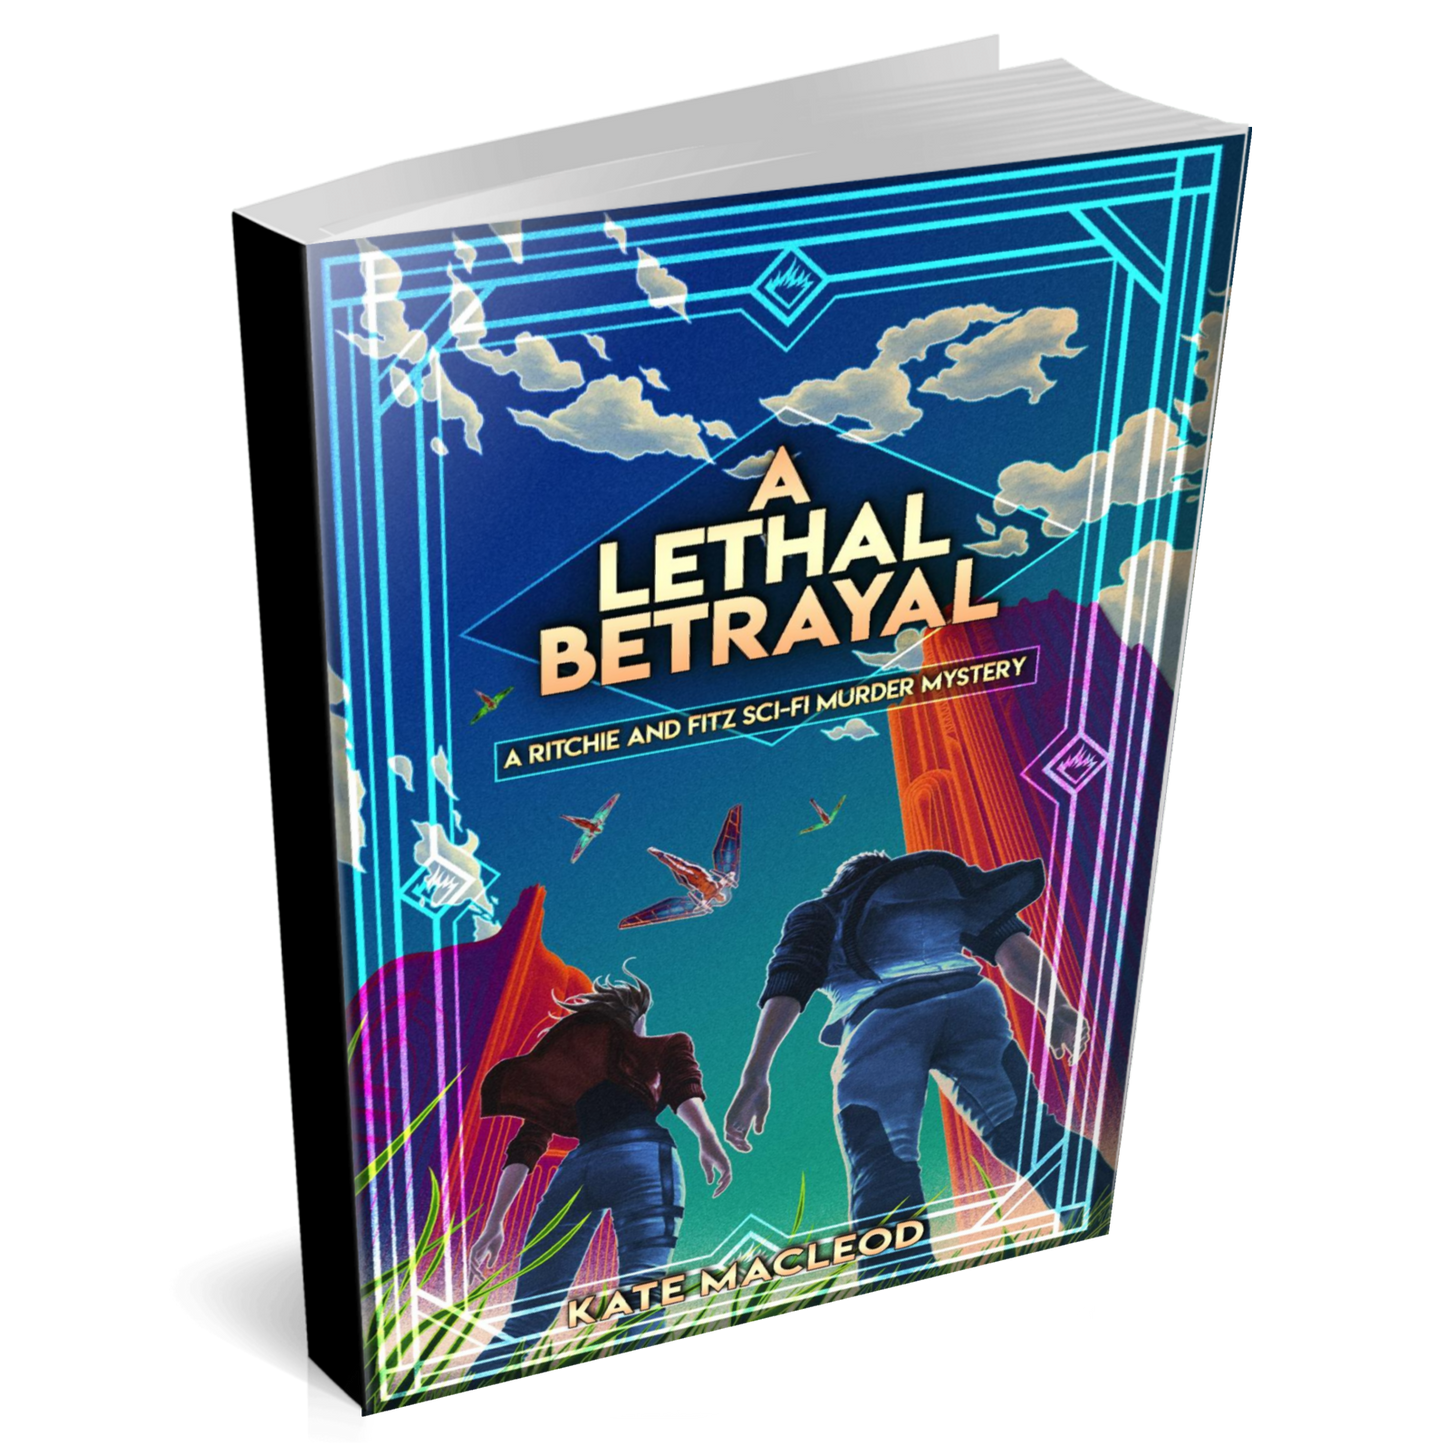 Book cover A Lethal Betrayal: A Ritchie and Fitz Sci-Fi Murder Mystery young adult novel